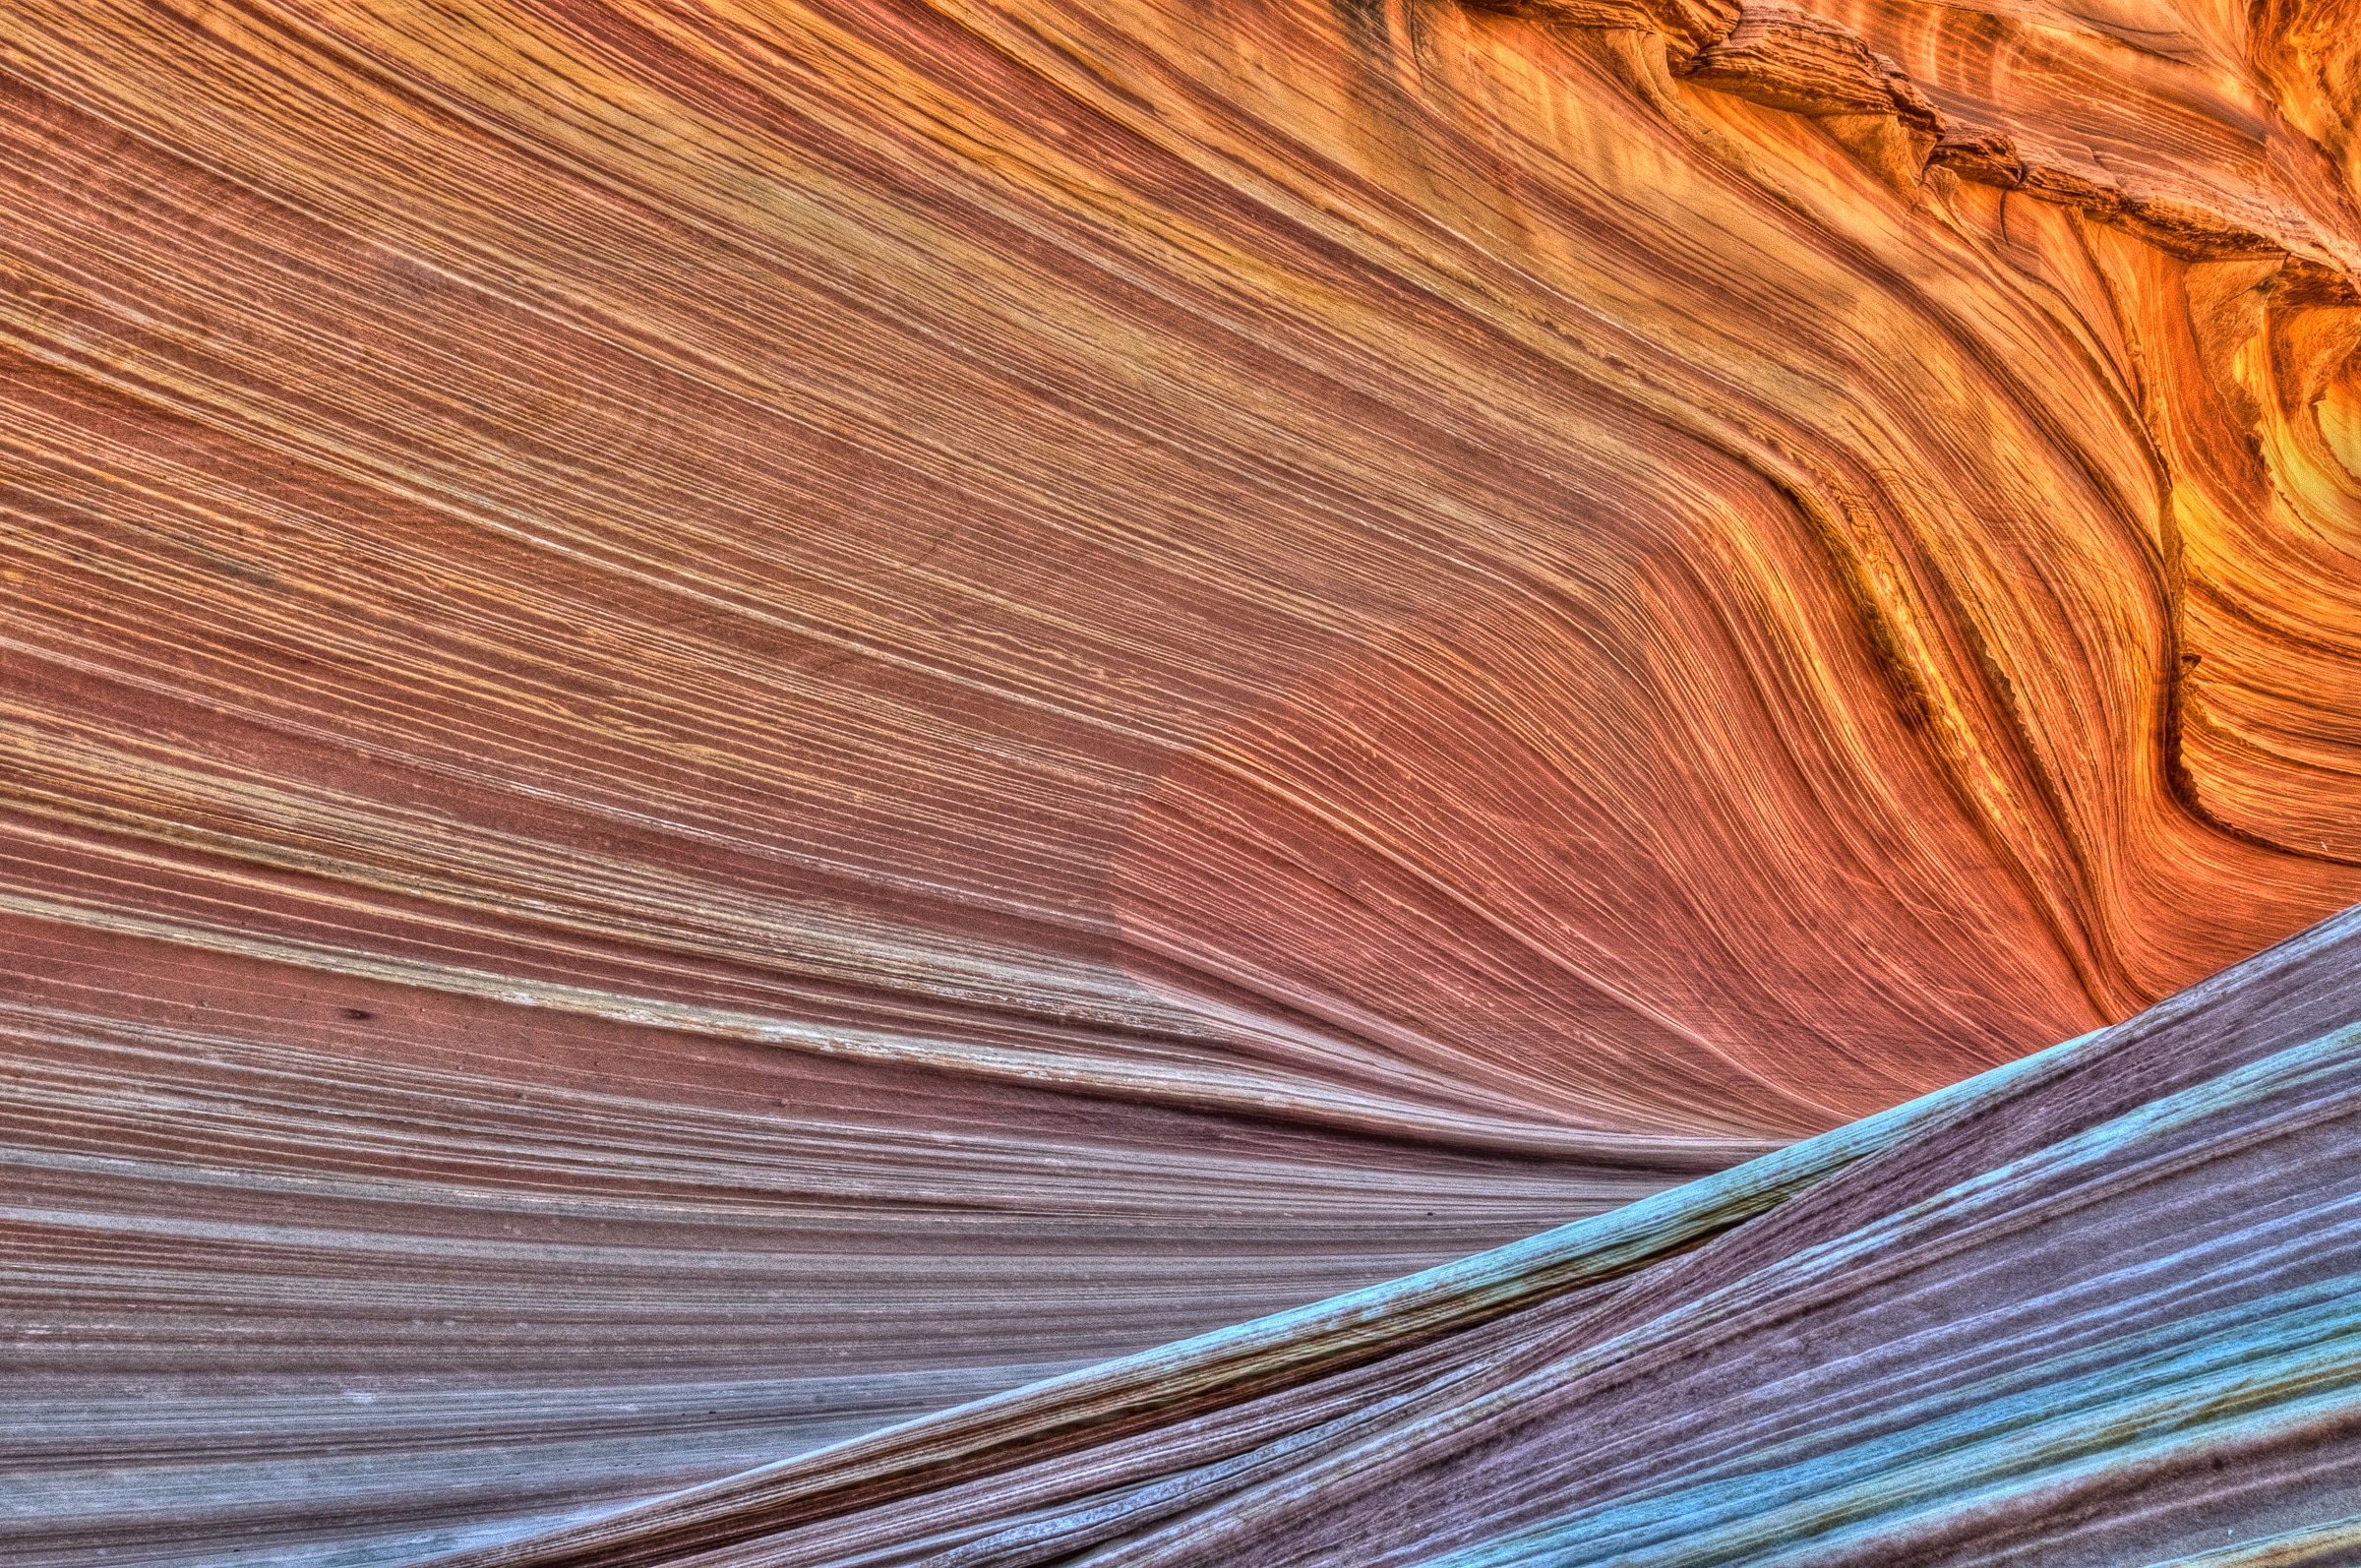 Closeup of the Wave in Coyote Buttes, part of the Vermilion Cliffs Wilderness National Monument.